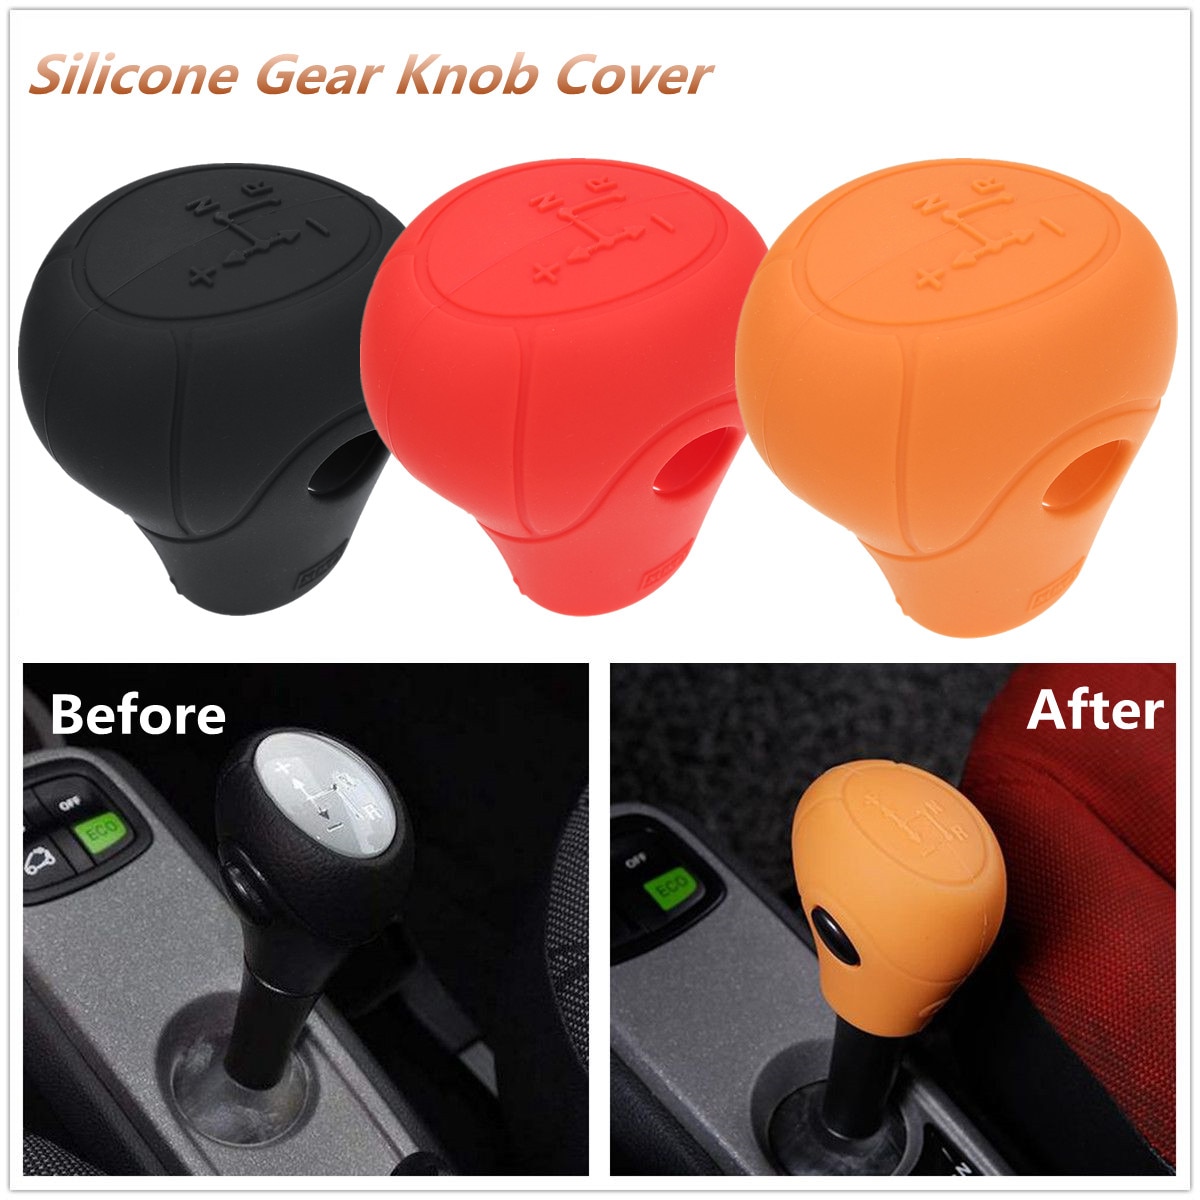 Auto Silicone Skin Pookknop Cover Pookknop Head Cover Case Voor Benz Smart Fortwo